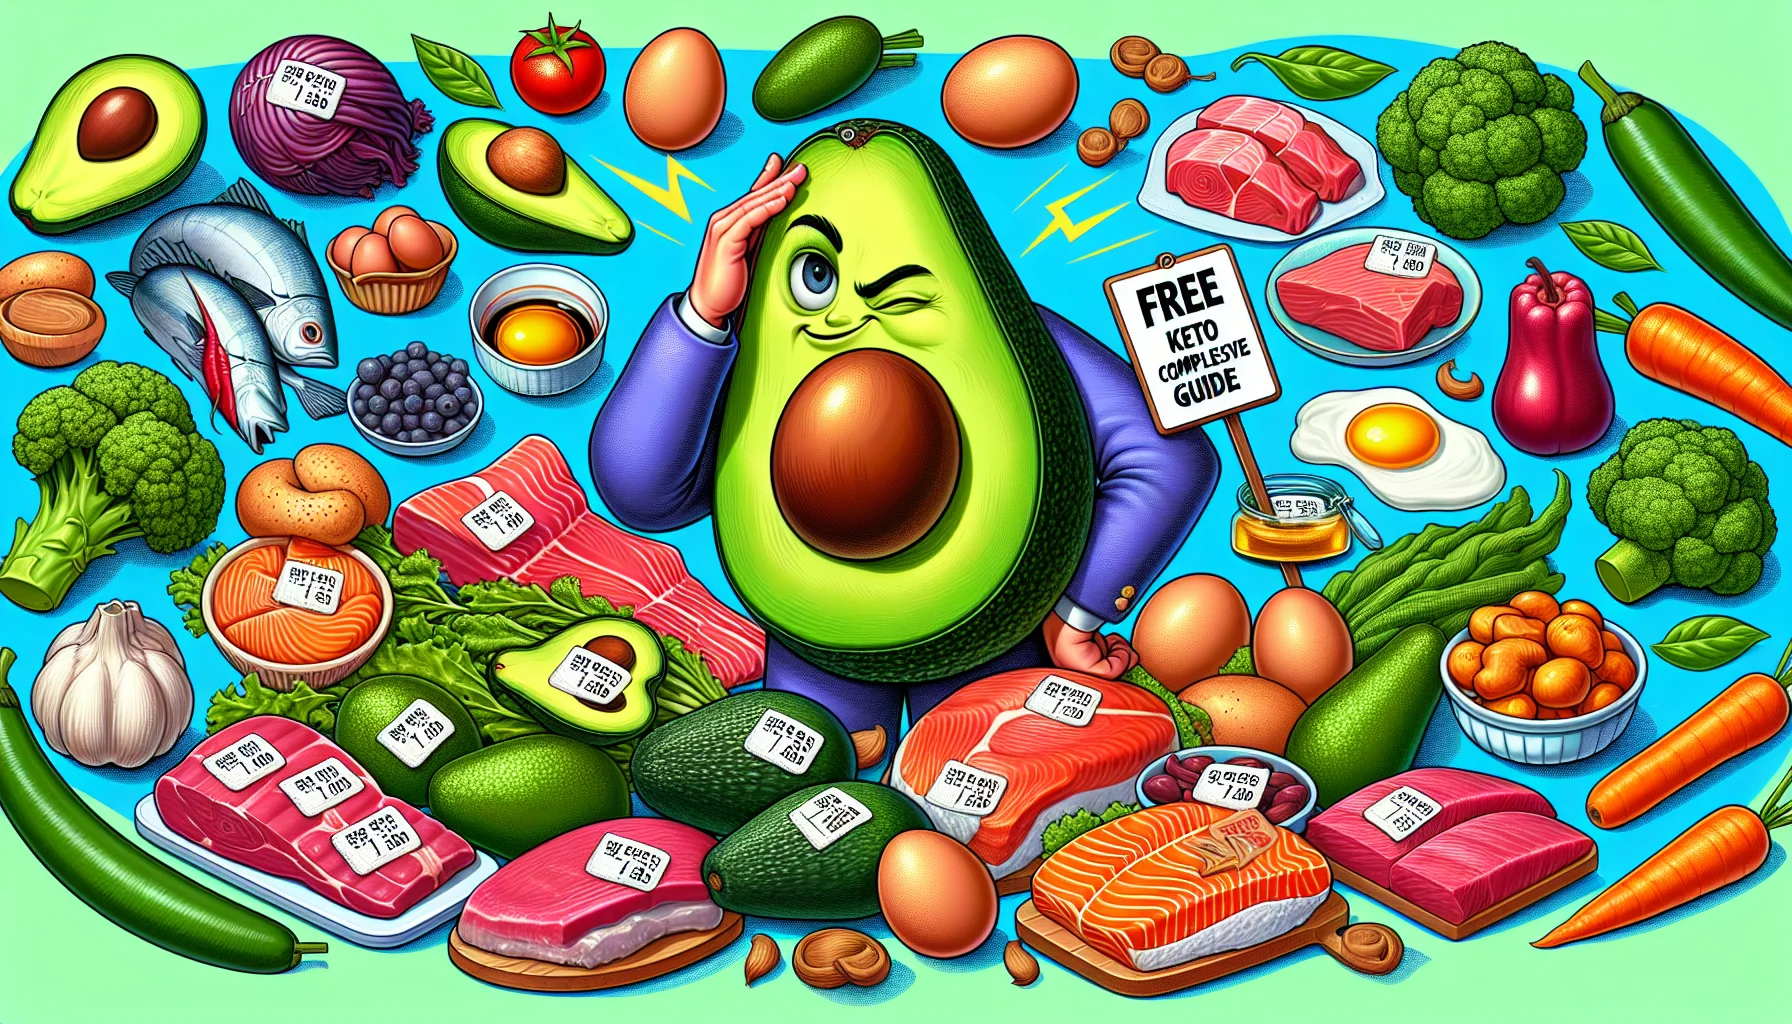 Generate a humorous and captivating image depicting the scenario of a Free Keto Diet Comprehensive Guide. Illustrate a vibrant, attractively arranged assortment of ketosis-favoring foods like avocados, eggs, fish, lean meats, and vegetables. Include visible price tags with surprisingly low prices on each item, underscoring the idea of eating healthy for less money. Incorporate subtle fun elements like a cheeky avocado winking to captivate audiences more effectively. Use bright, lively colors to make the scene more enticing and encourage viewers towards healthier dietary choices.